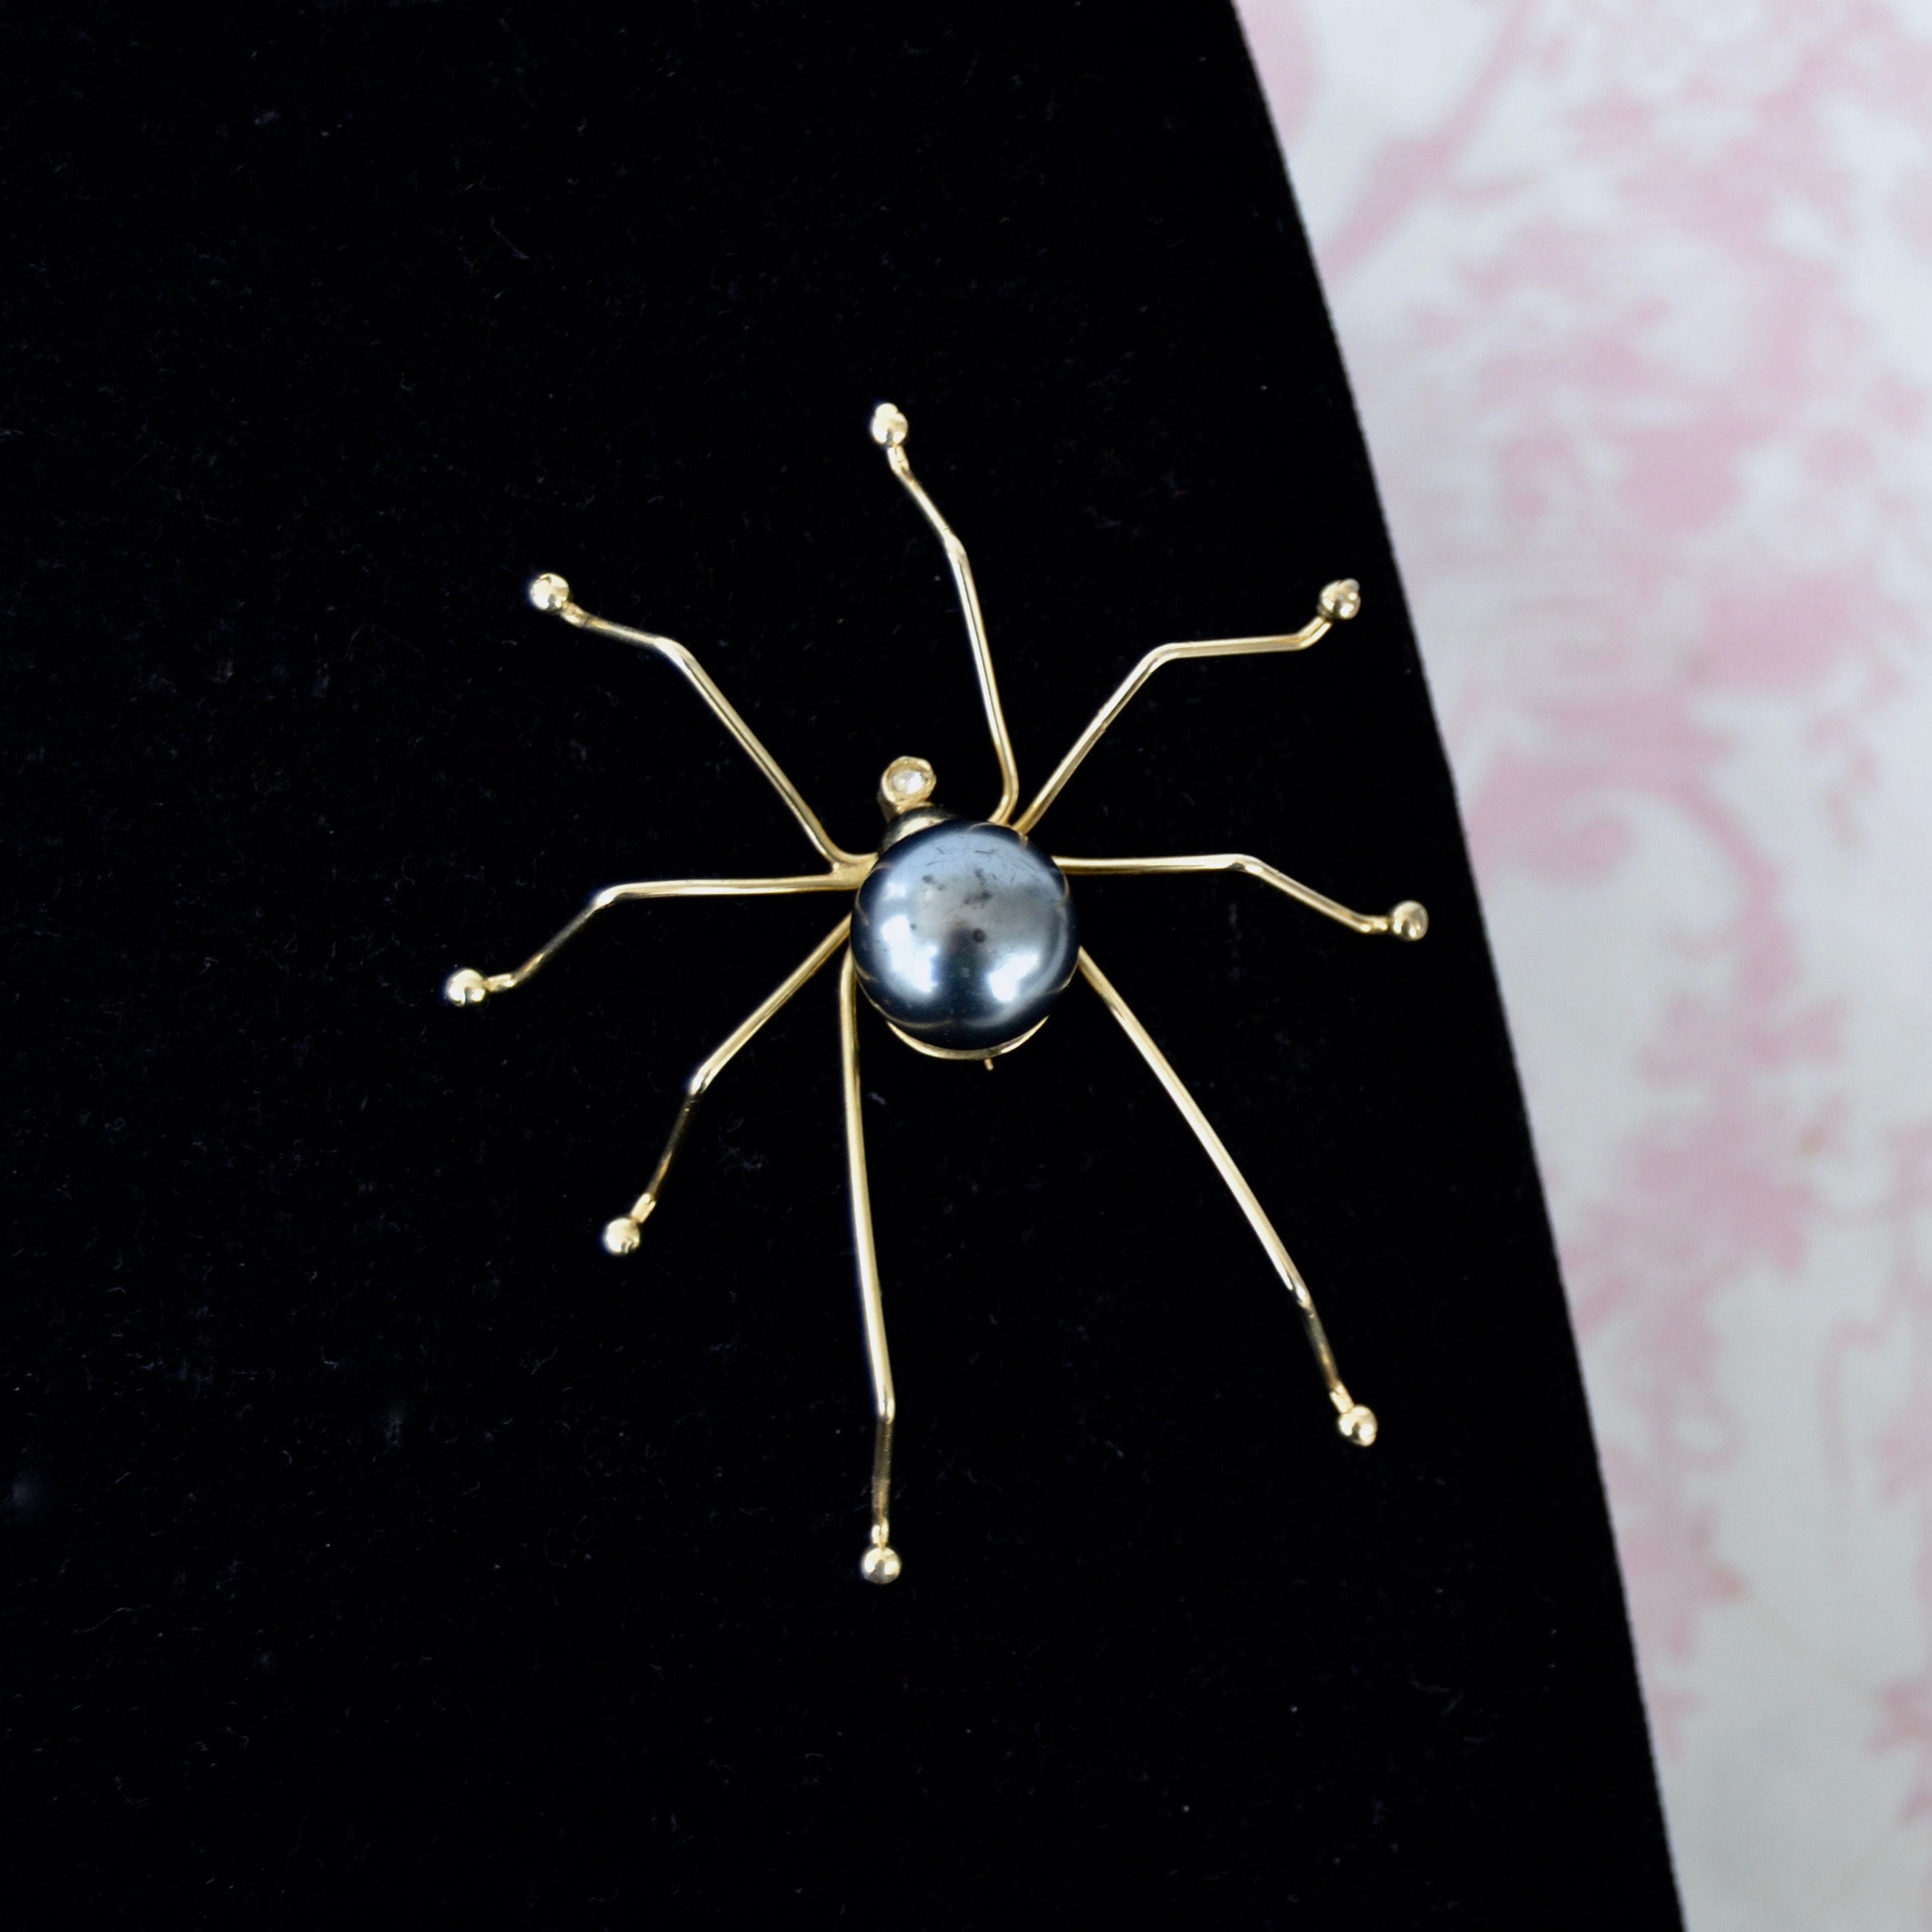 Vintage Spider Brooch Made of Gold Tone Metal With Plastic 